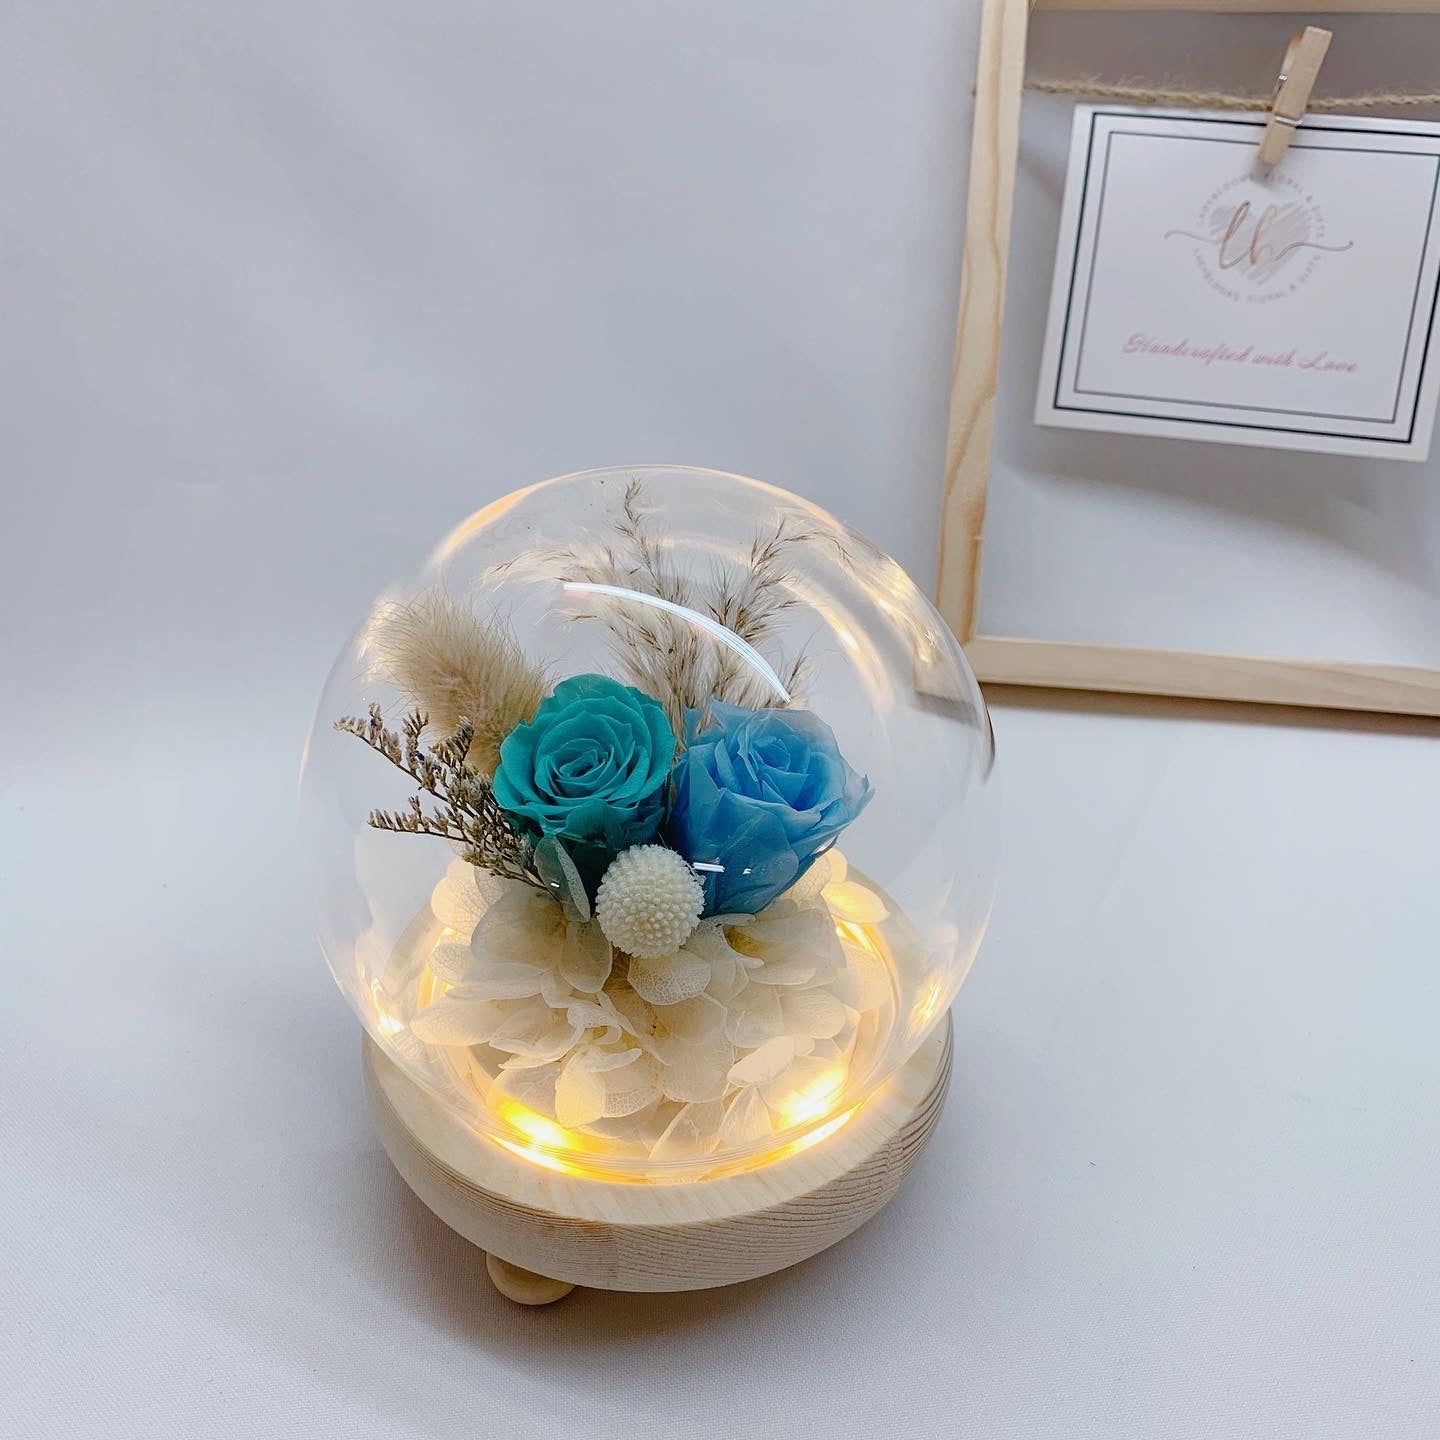 Tiffany Blue Rose in Sphere Dome